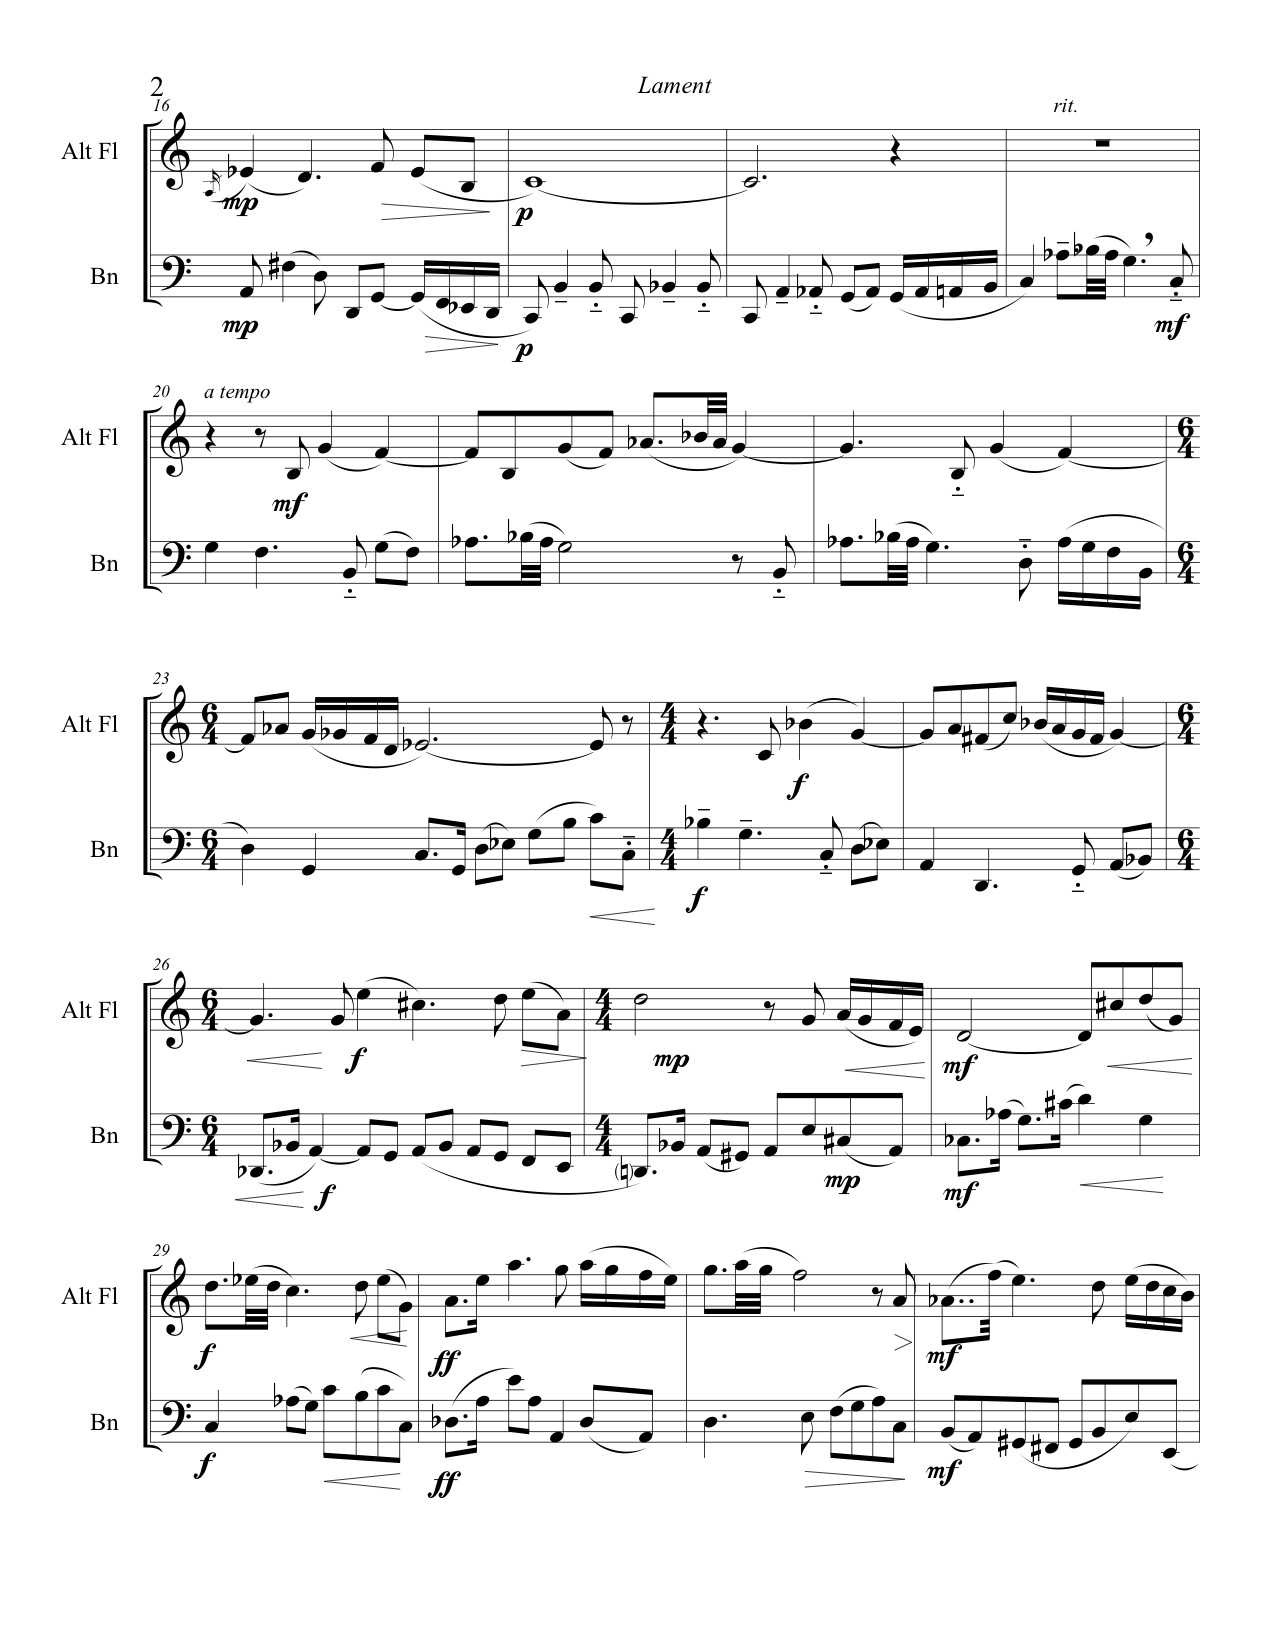 Lament for alto flute and bassoon